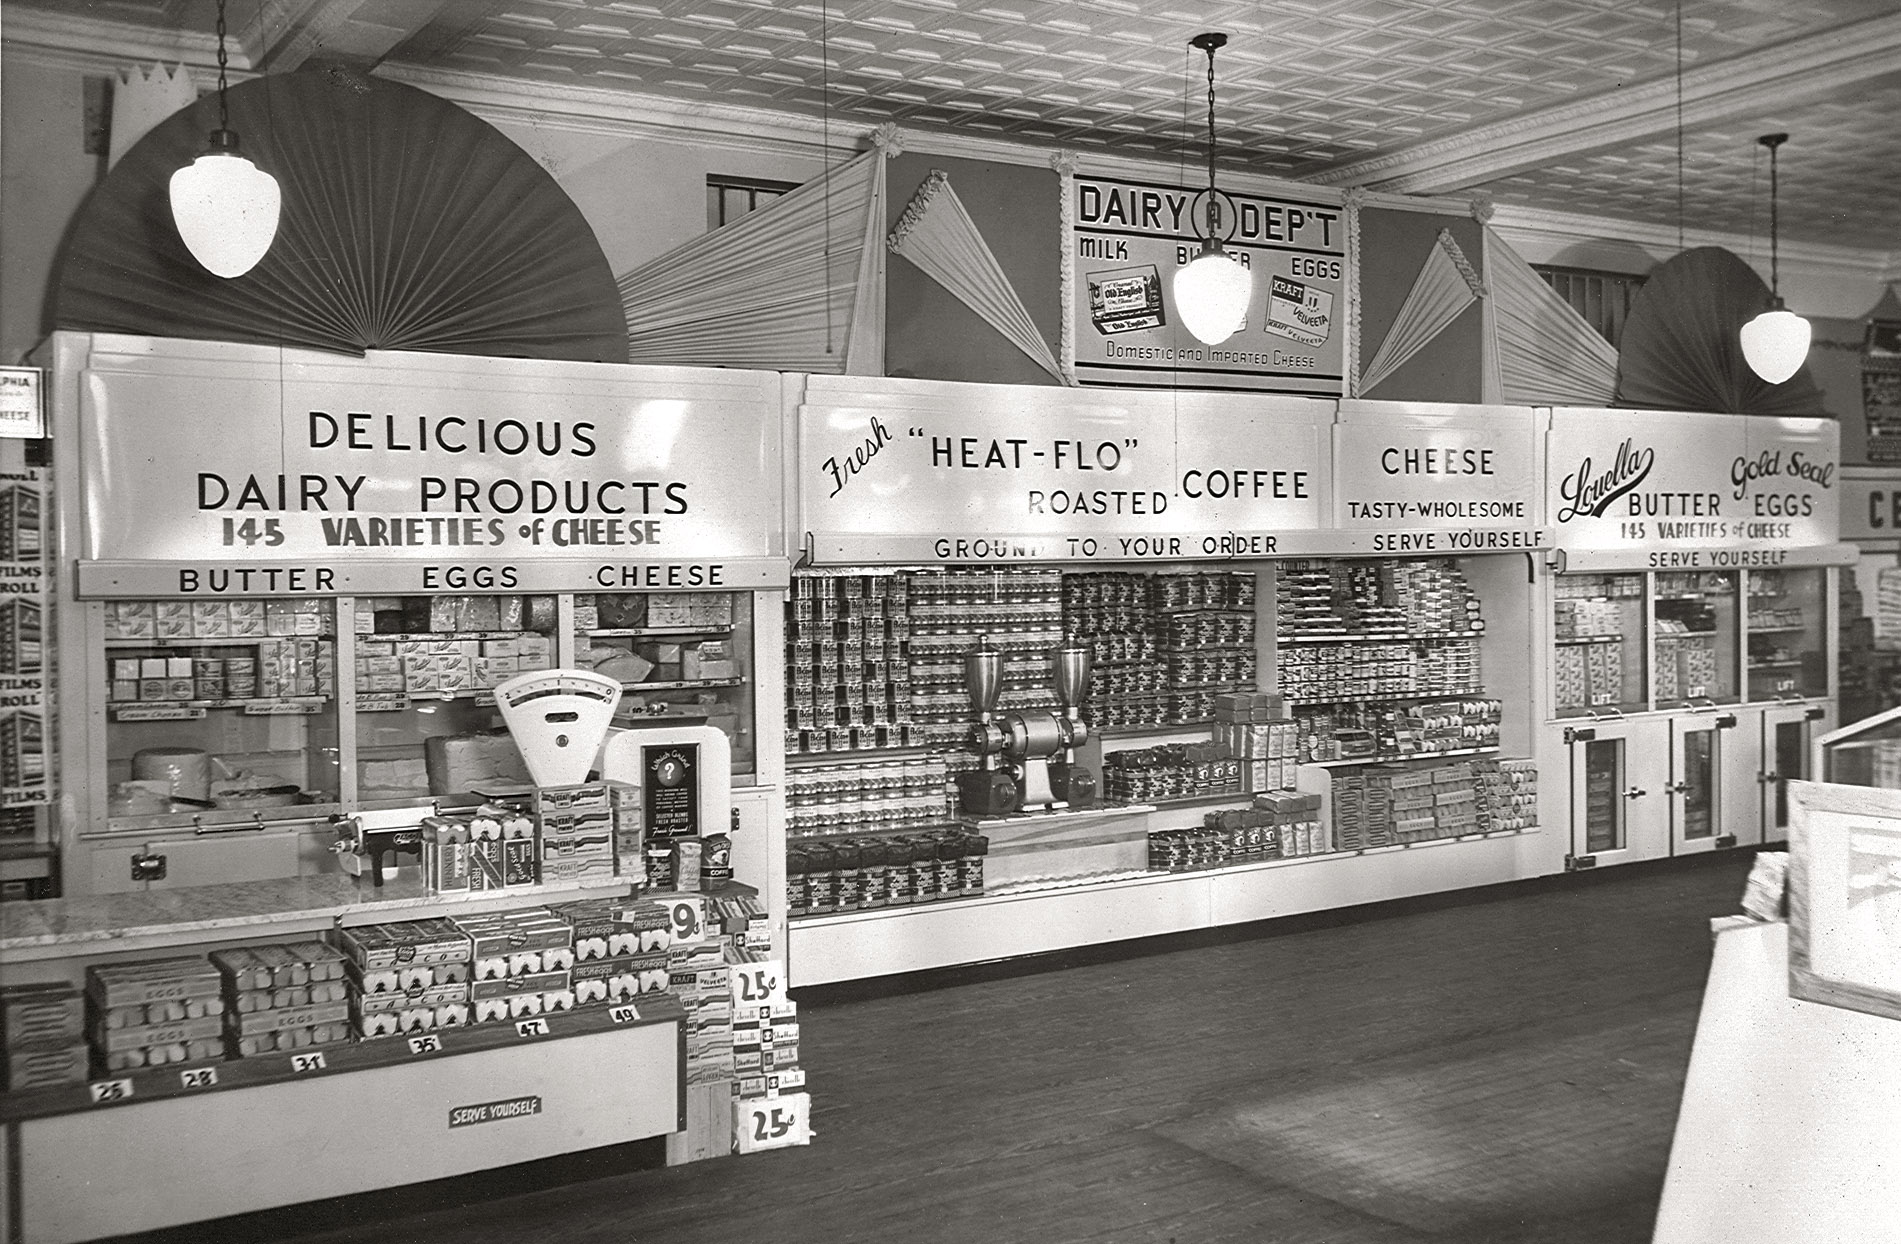 Supermarket dairy case circa 1950. You'll get change back from your half-dollar if you purchase a dozen eggs. View full size.